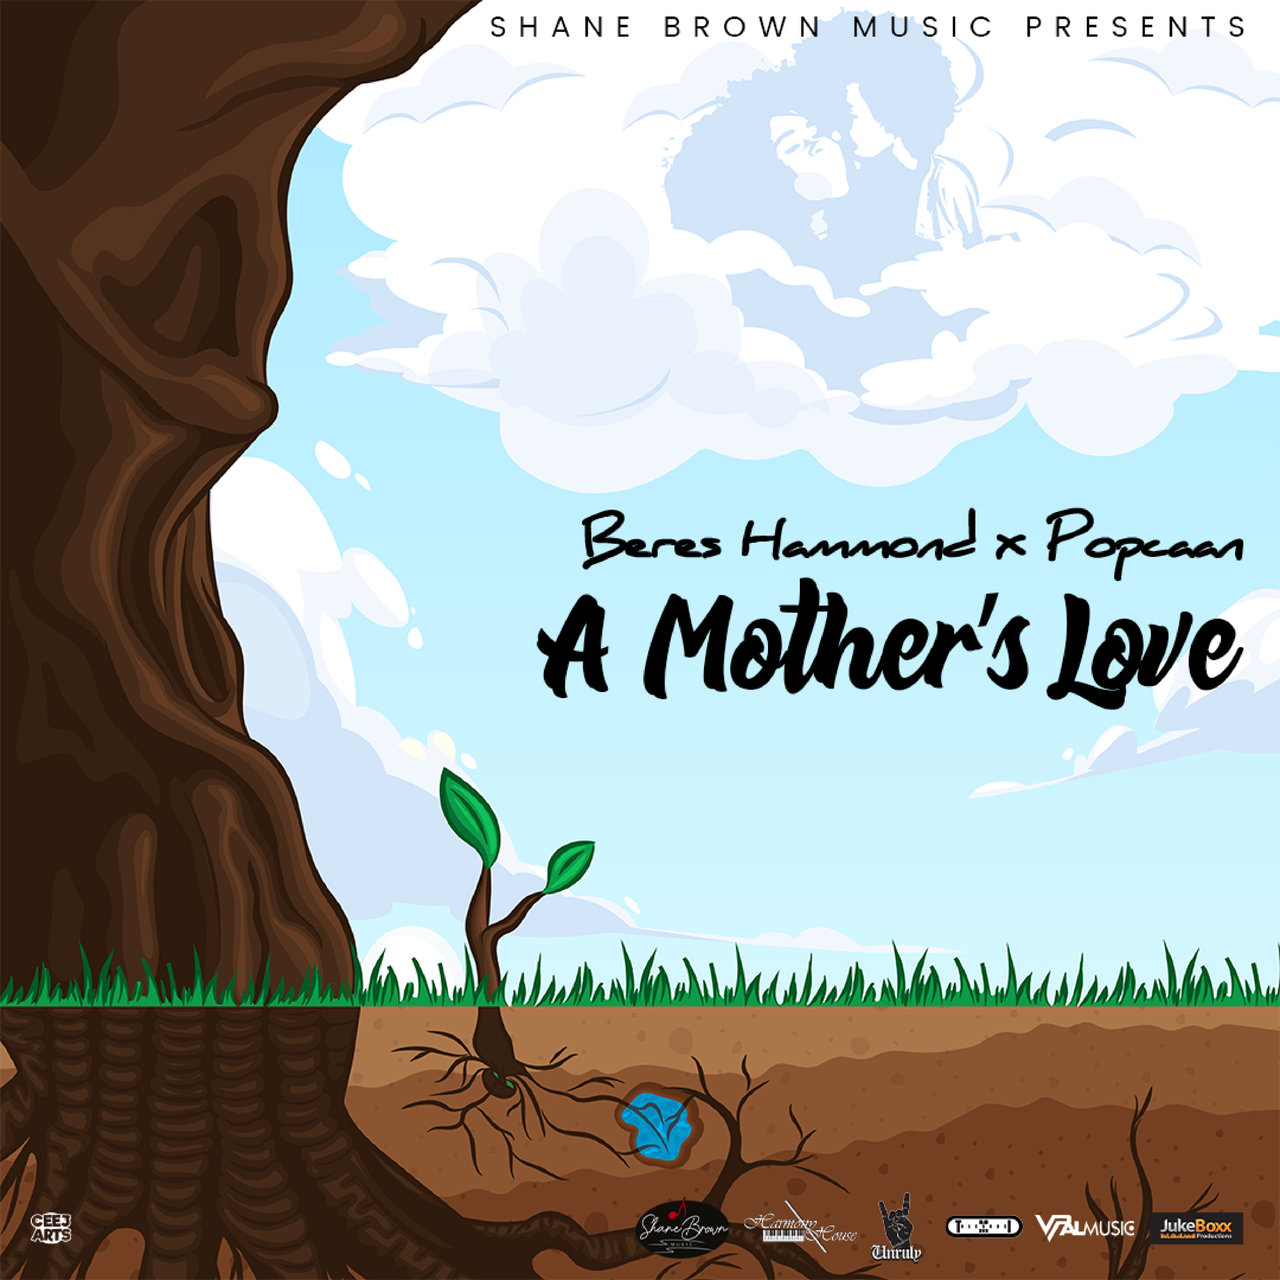 Beres Hammond - A Mother's Love (ft. Popcaan) (Cover)